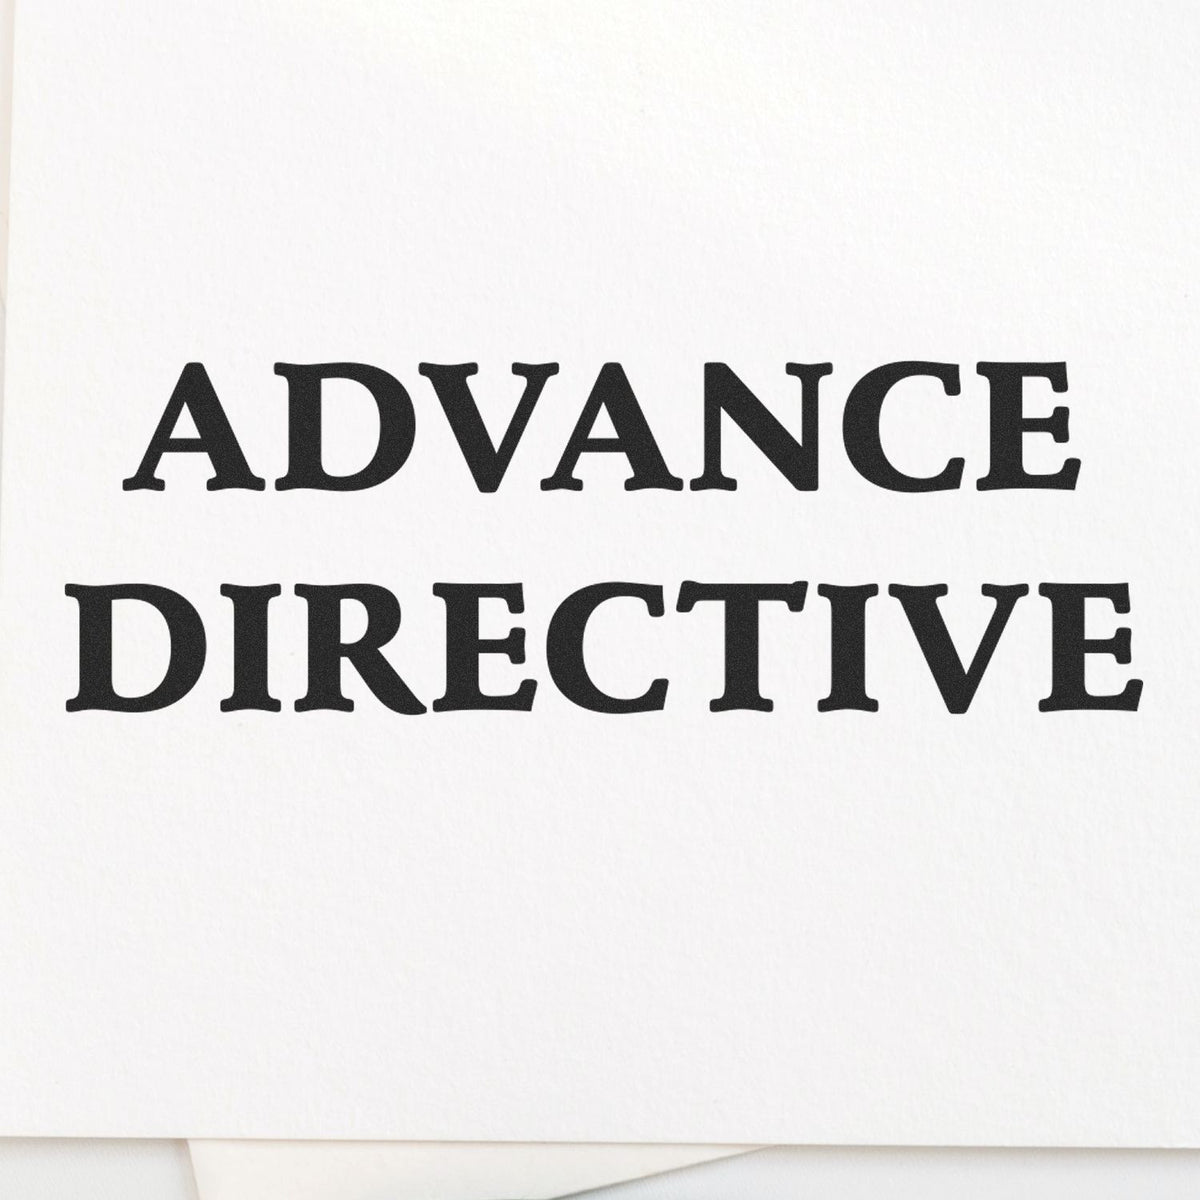 Advance Directive Rubber Stamp Lifestyle Photo